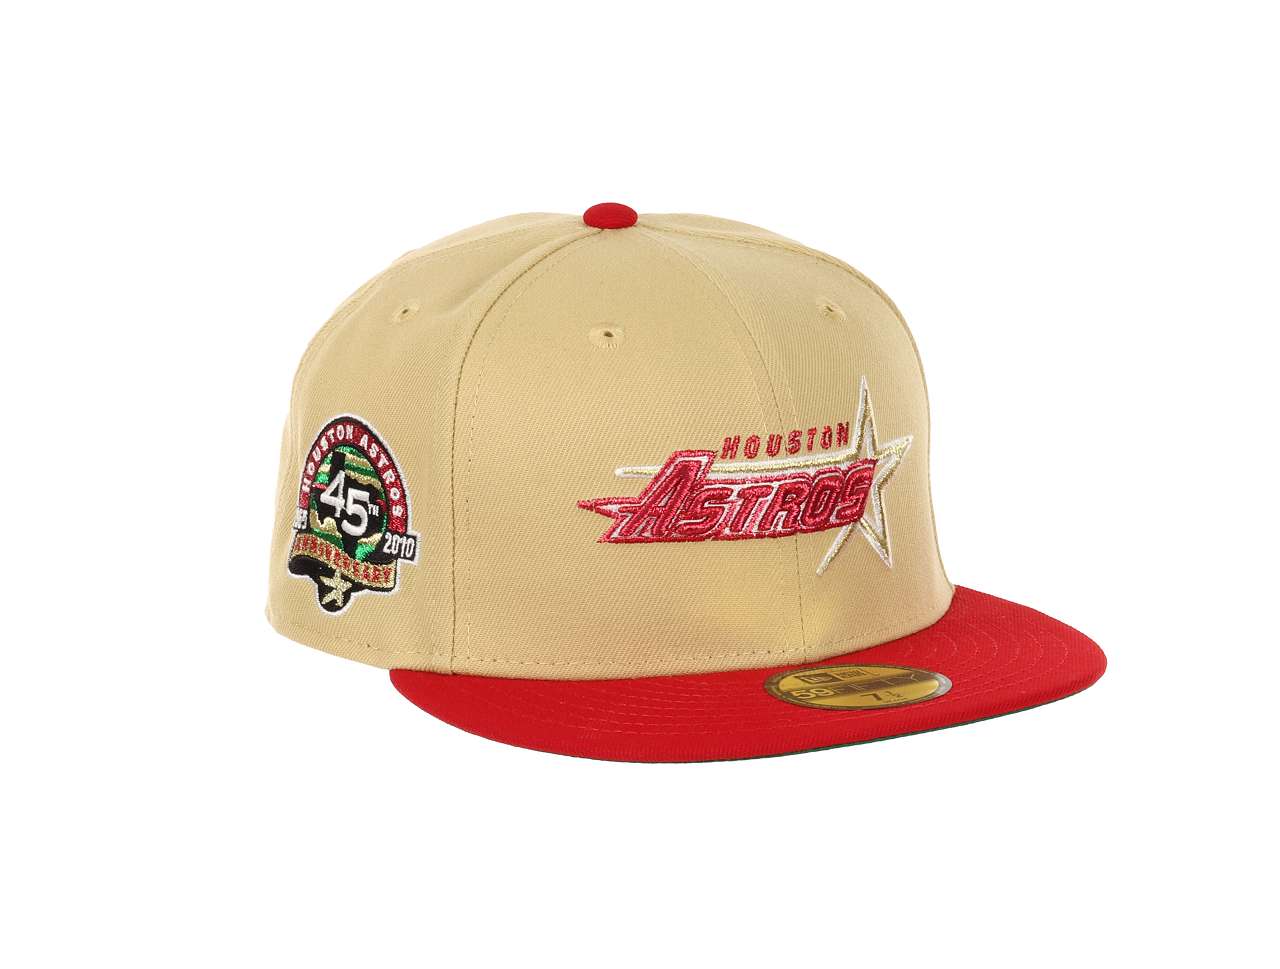 Houston Astros MLB Cooperstown 45th Anniversary 1965-2010 Beige Red 59Fifty Basecap New Era